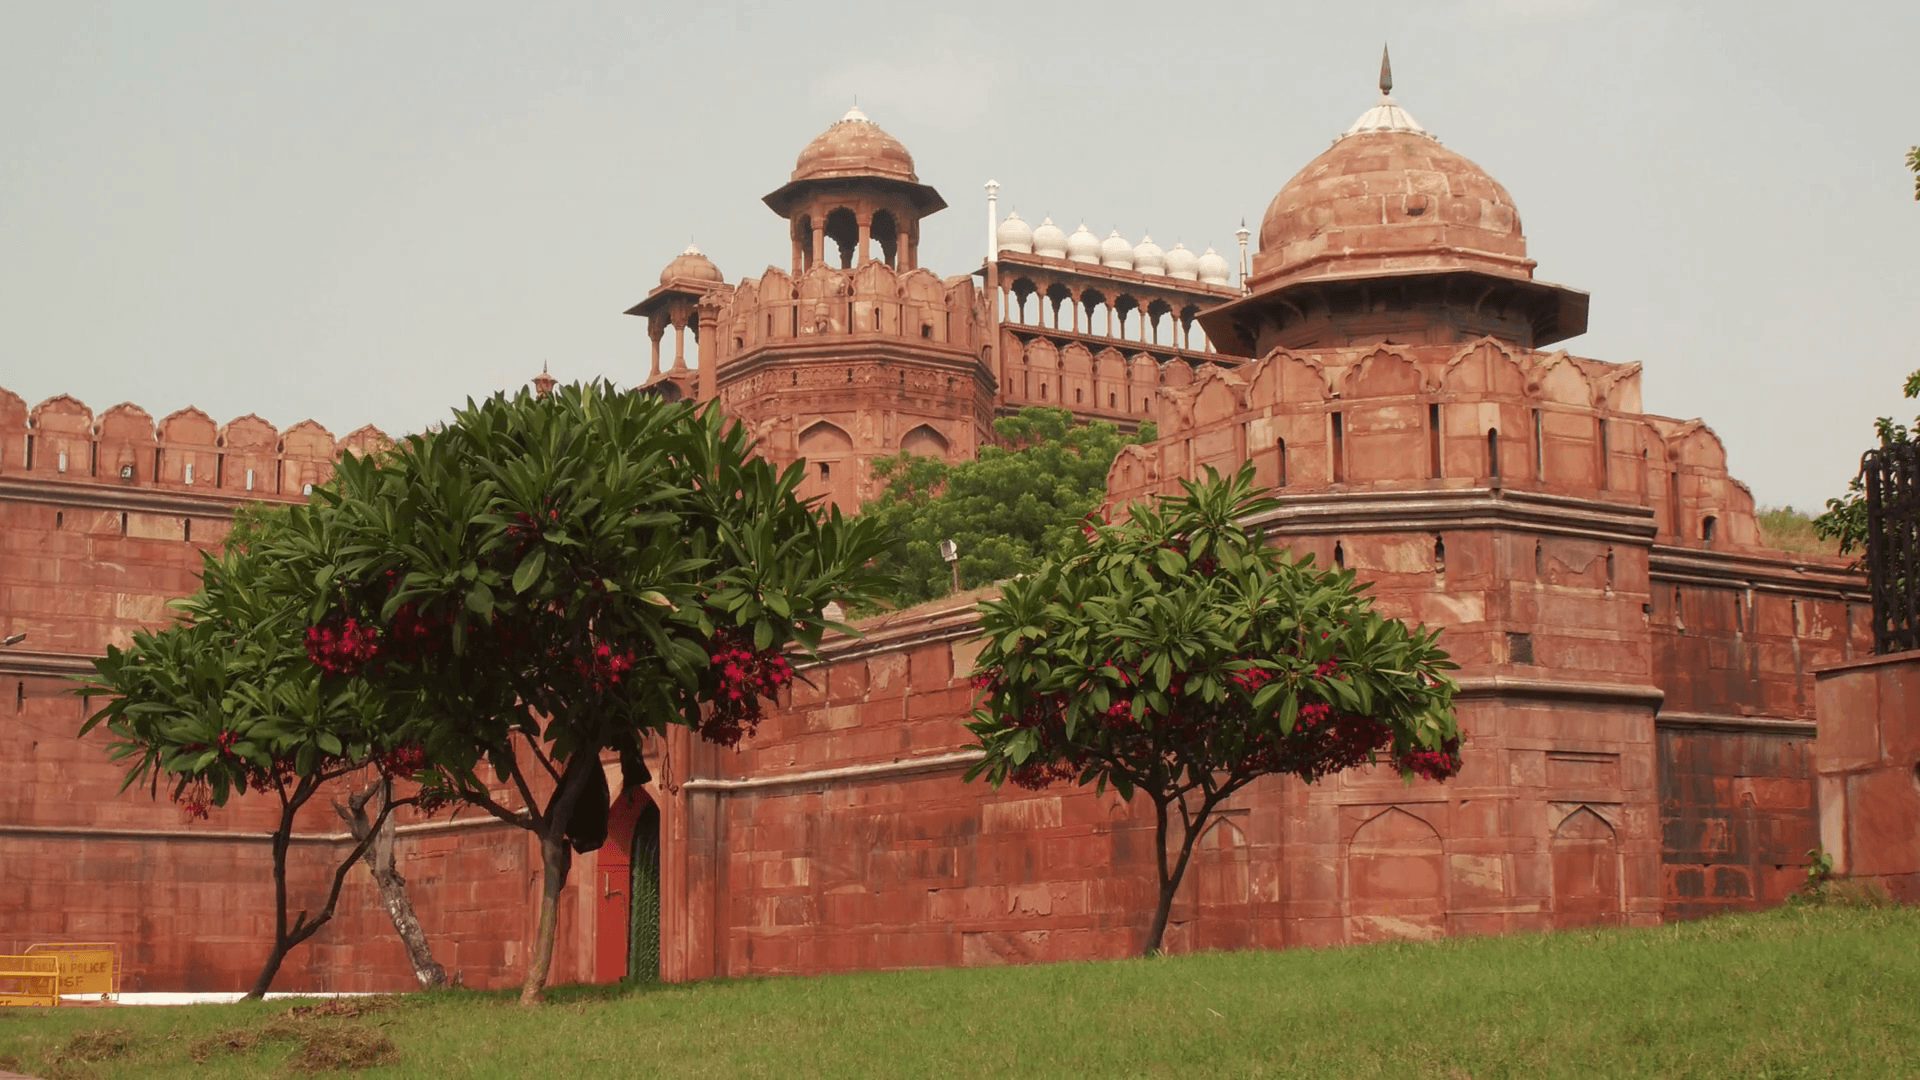 The Red Fort Lal Qila, a historical fort in the city of Delhi